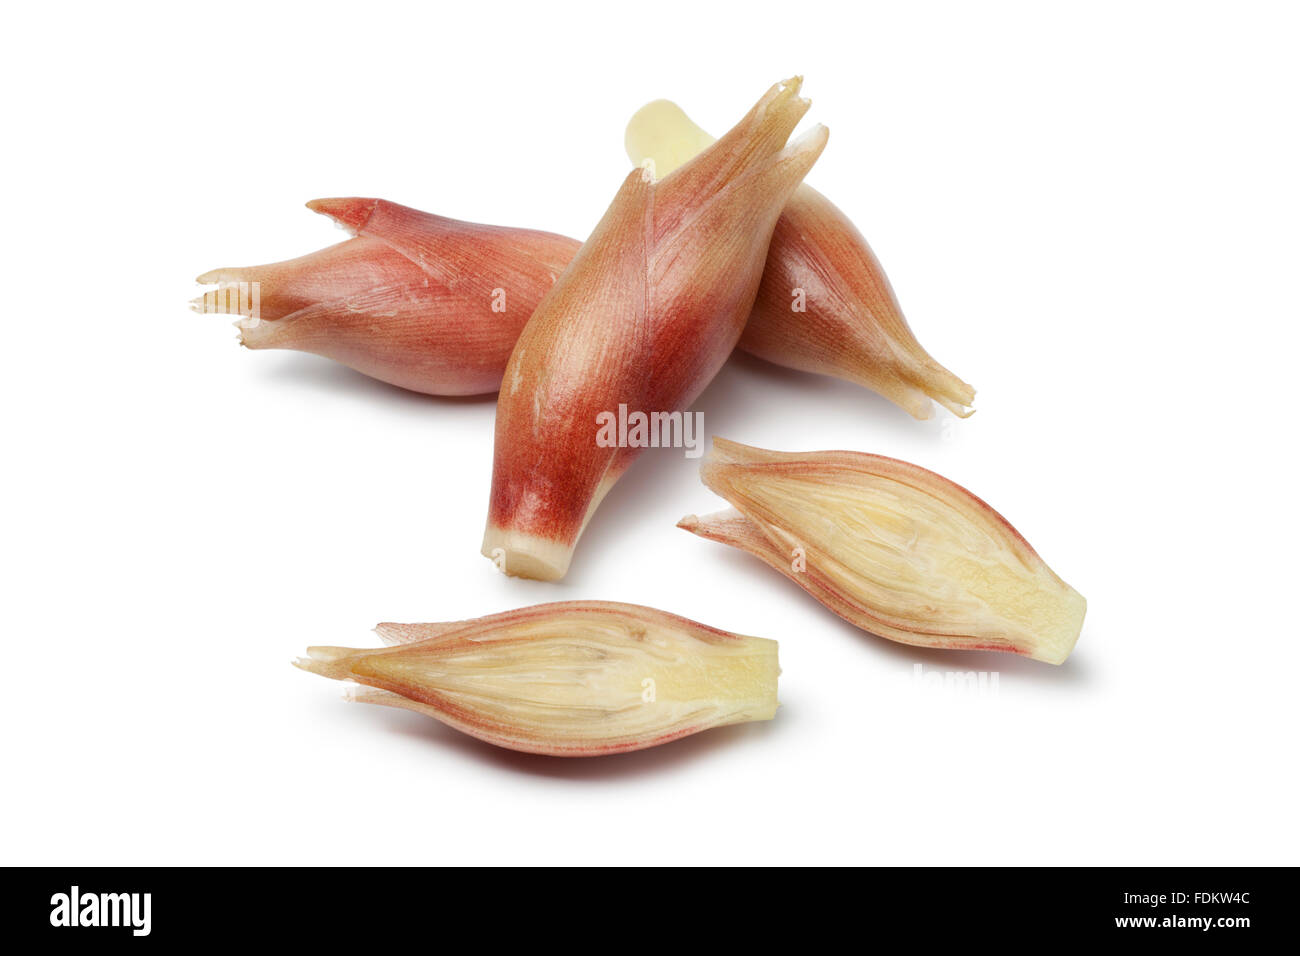 Whole and half fresh ginger buds on white background Stock Photo